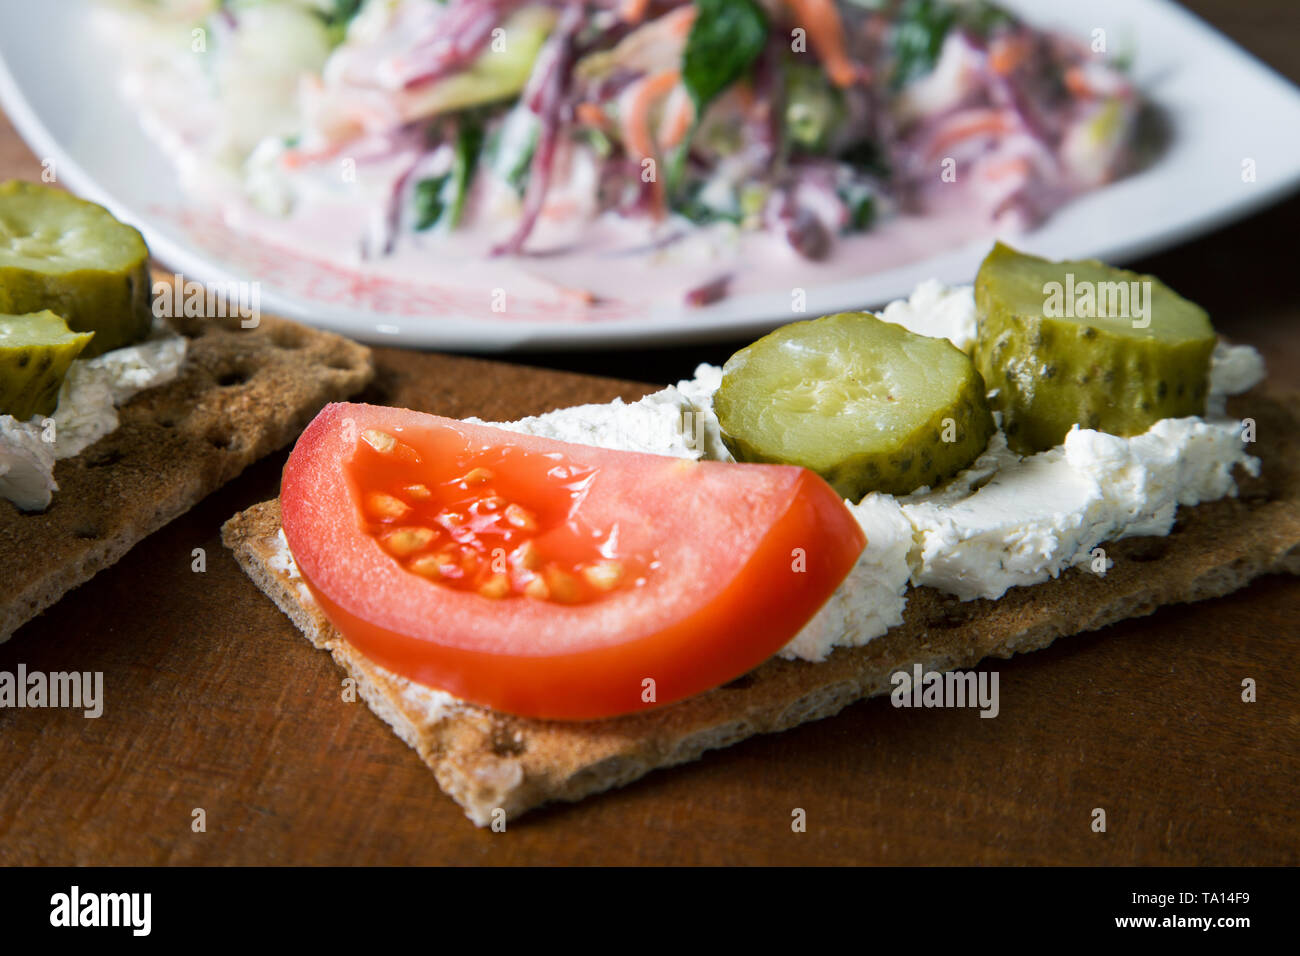 still life with a plate of vegetable salad and tartlets Stock Photo